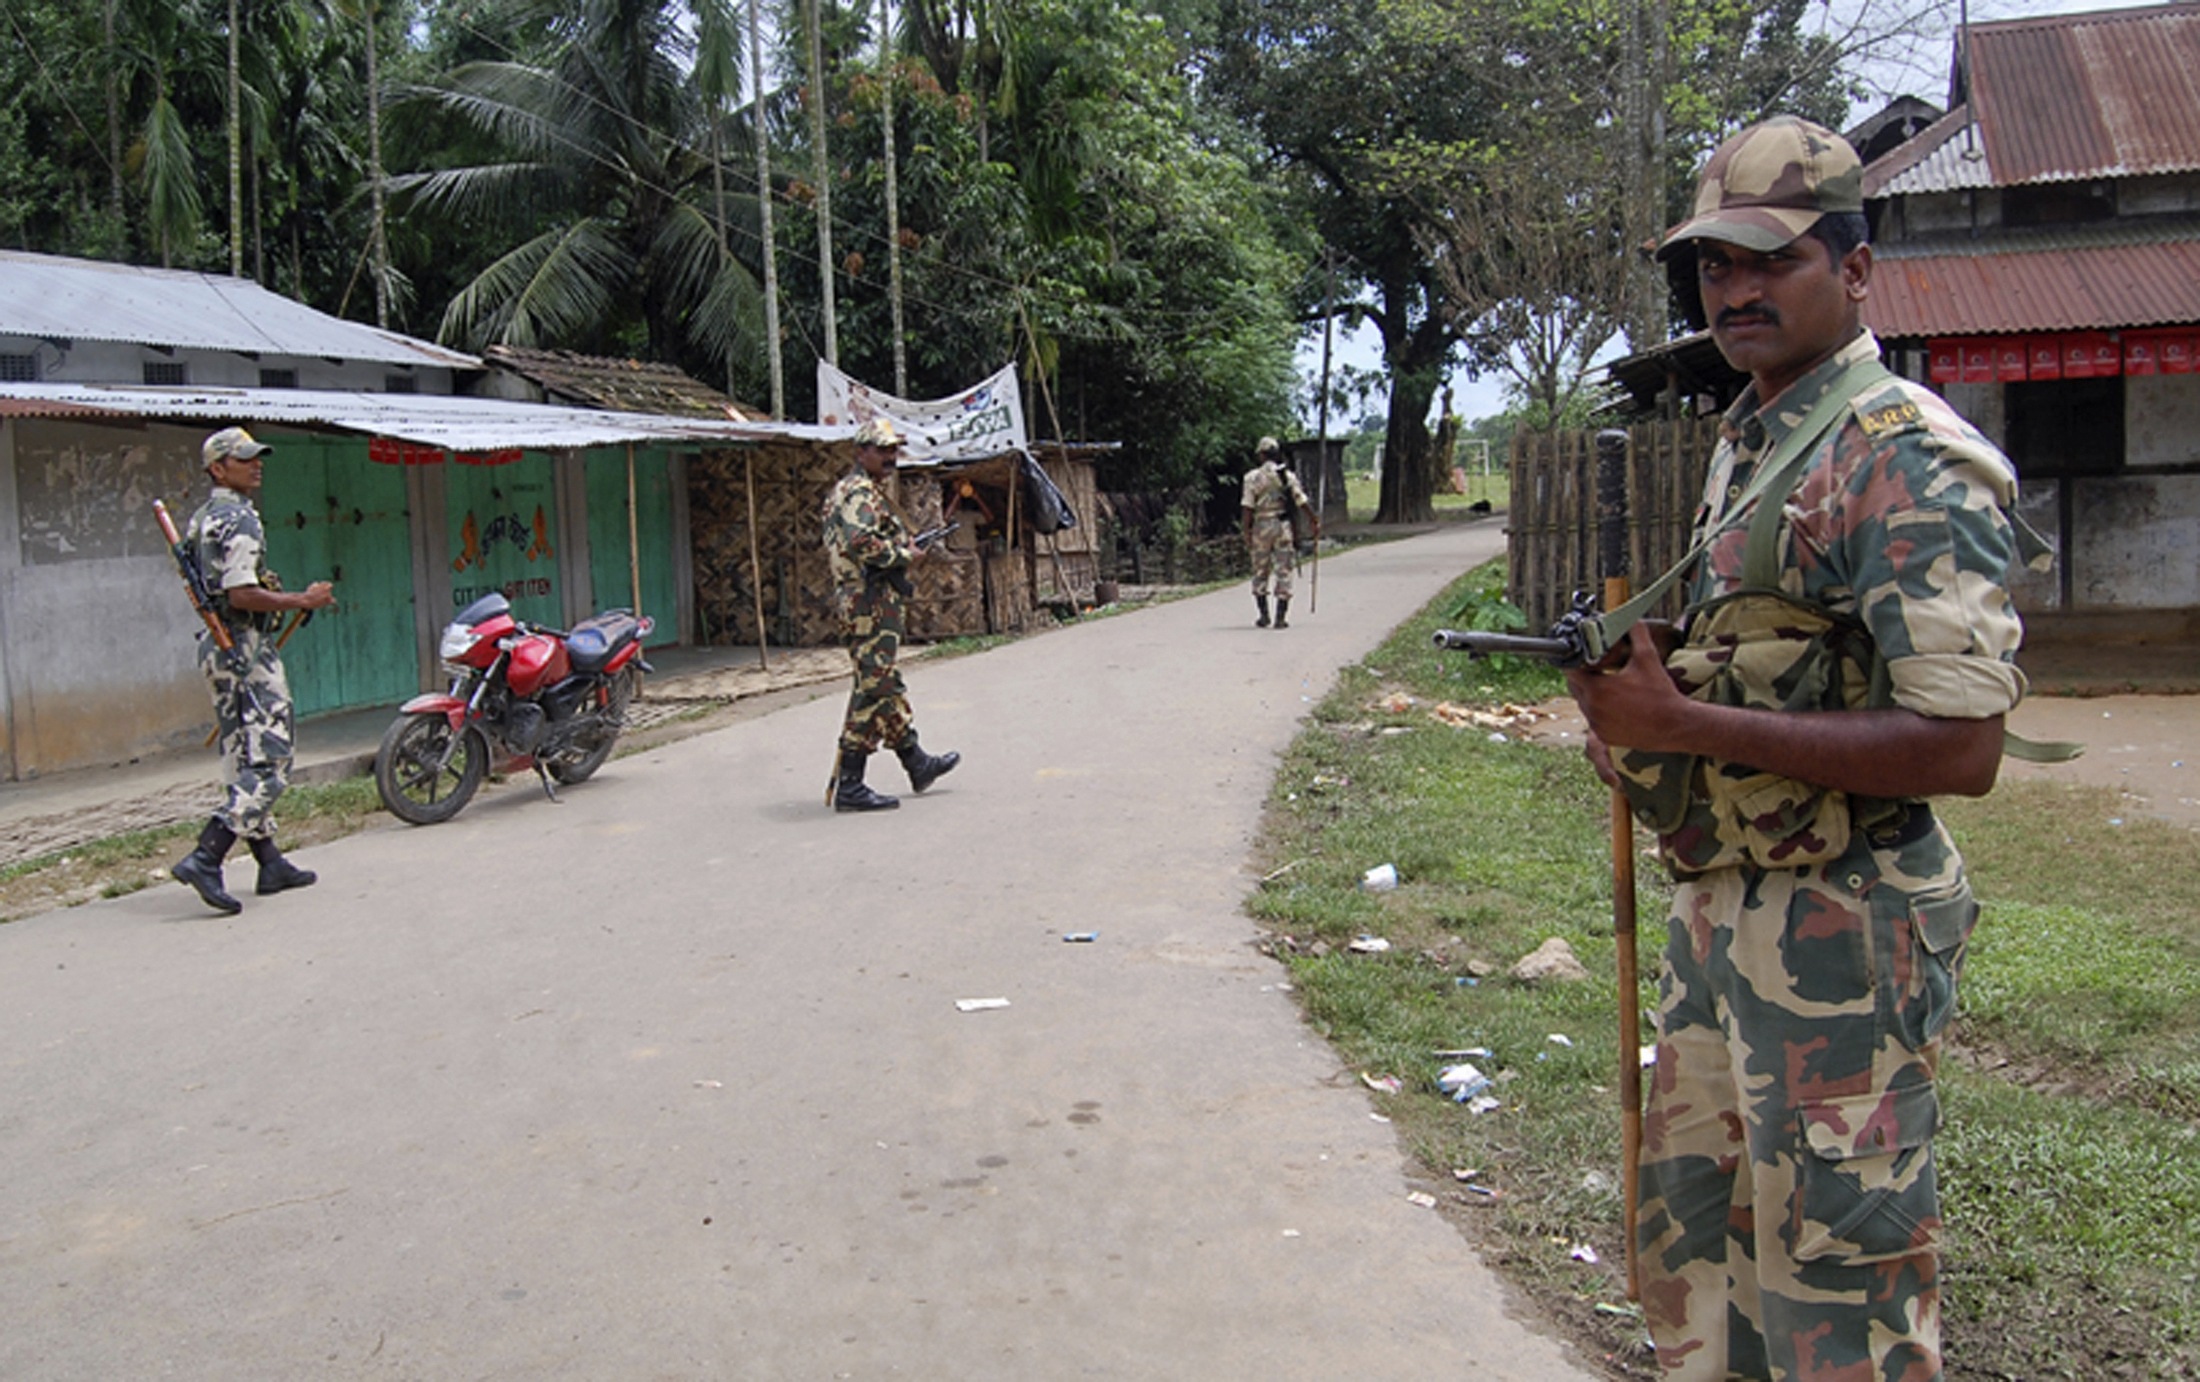 Indian police in Assam. Militants from separatist group the Garo National Liberation Army killed seven villagers in Golapara district of Assam state. Photo: Reuters